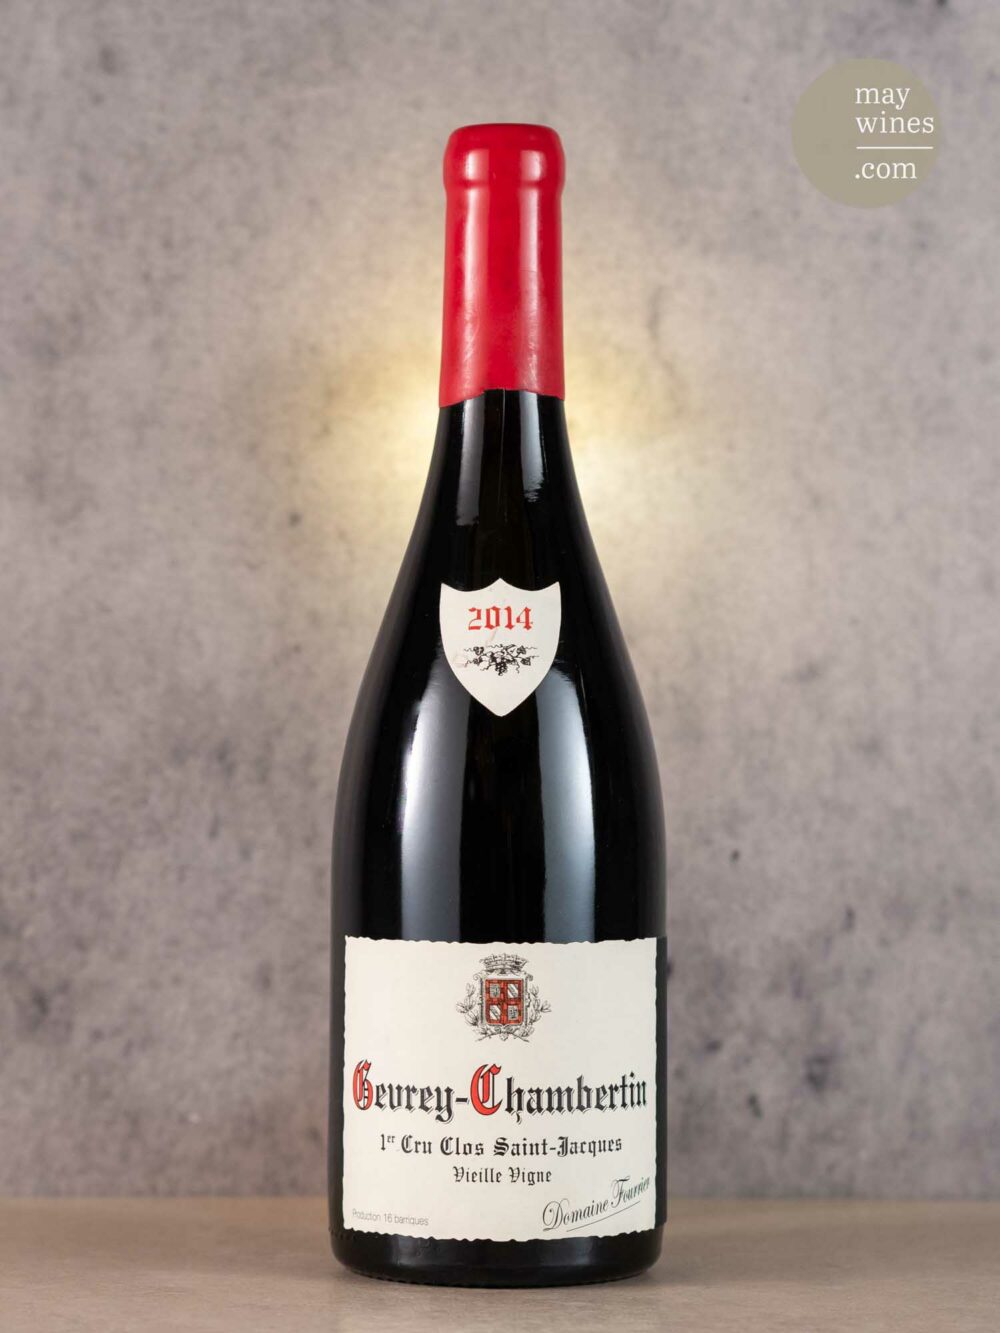 May Wines – Rotwein – 2014 Gevrey-Chambertin Clos St. Jacques Premier Cru - Domaine Fourrier